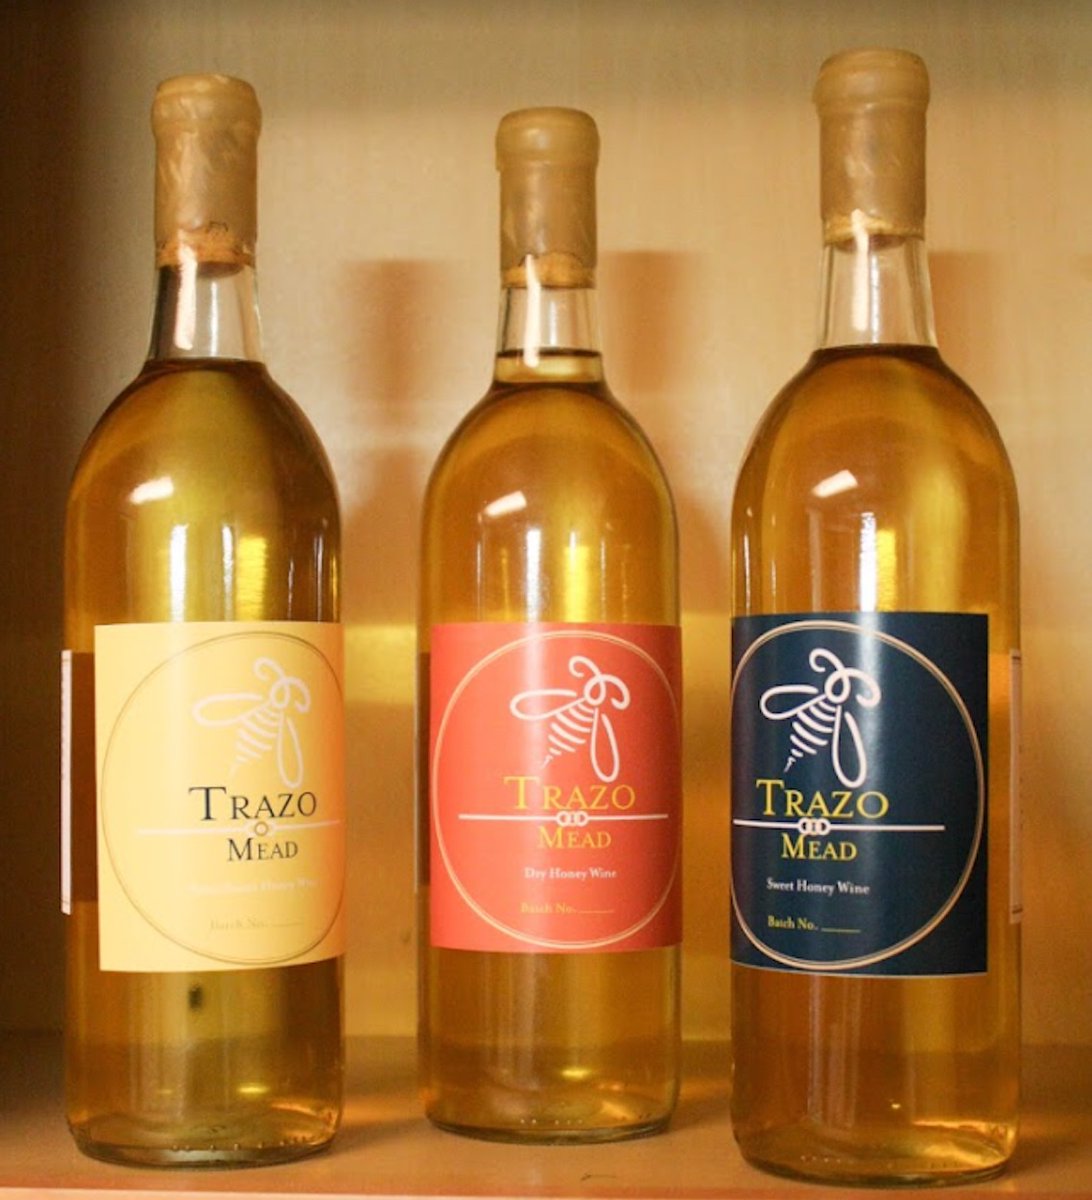 It’s #winewednesday at the #trazomeadery in #ClarksvilleTN. Want to sample meads made from honey produced by their own bees?

#ClarksvilleTN #visitclarksvilletn #visitclarksville #ibelieveinclarksville #tennesseemeadery #madeintn #tnwine #travelwritersuniversity #ifwtwa1 @ifwtwa1